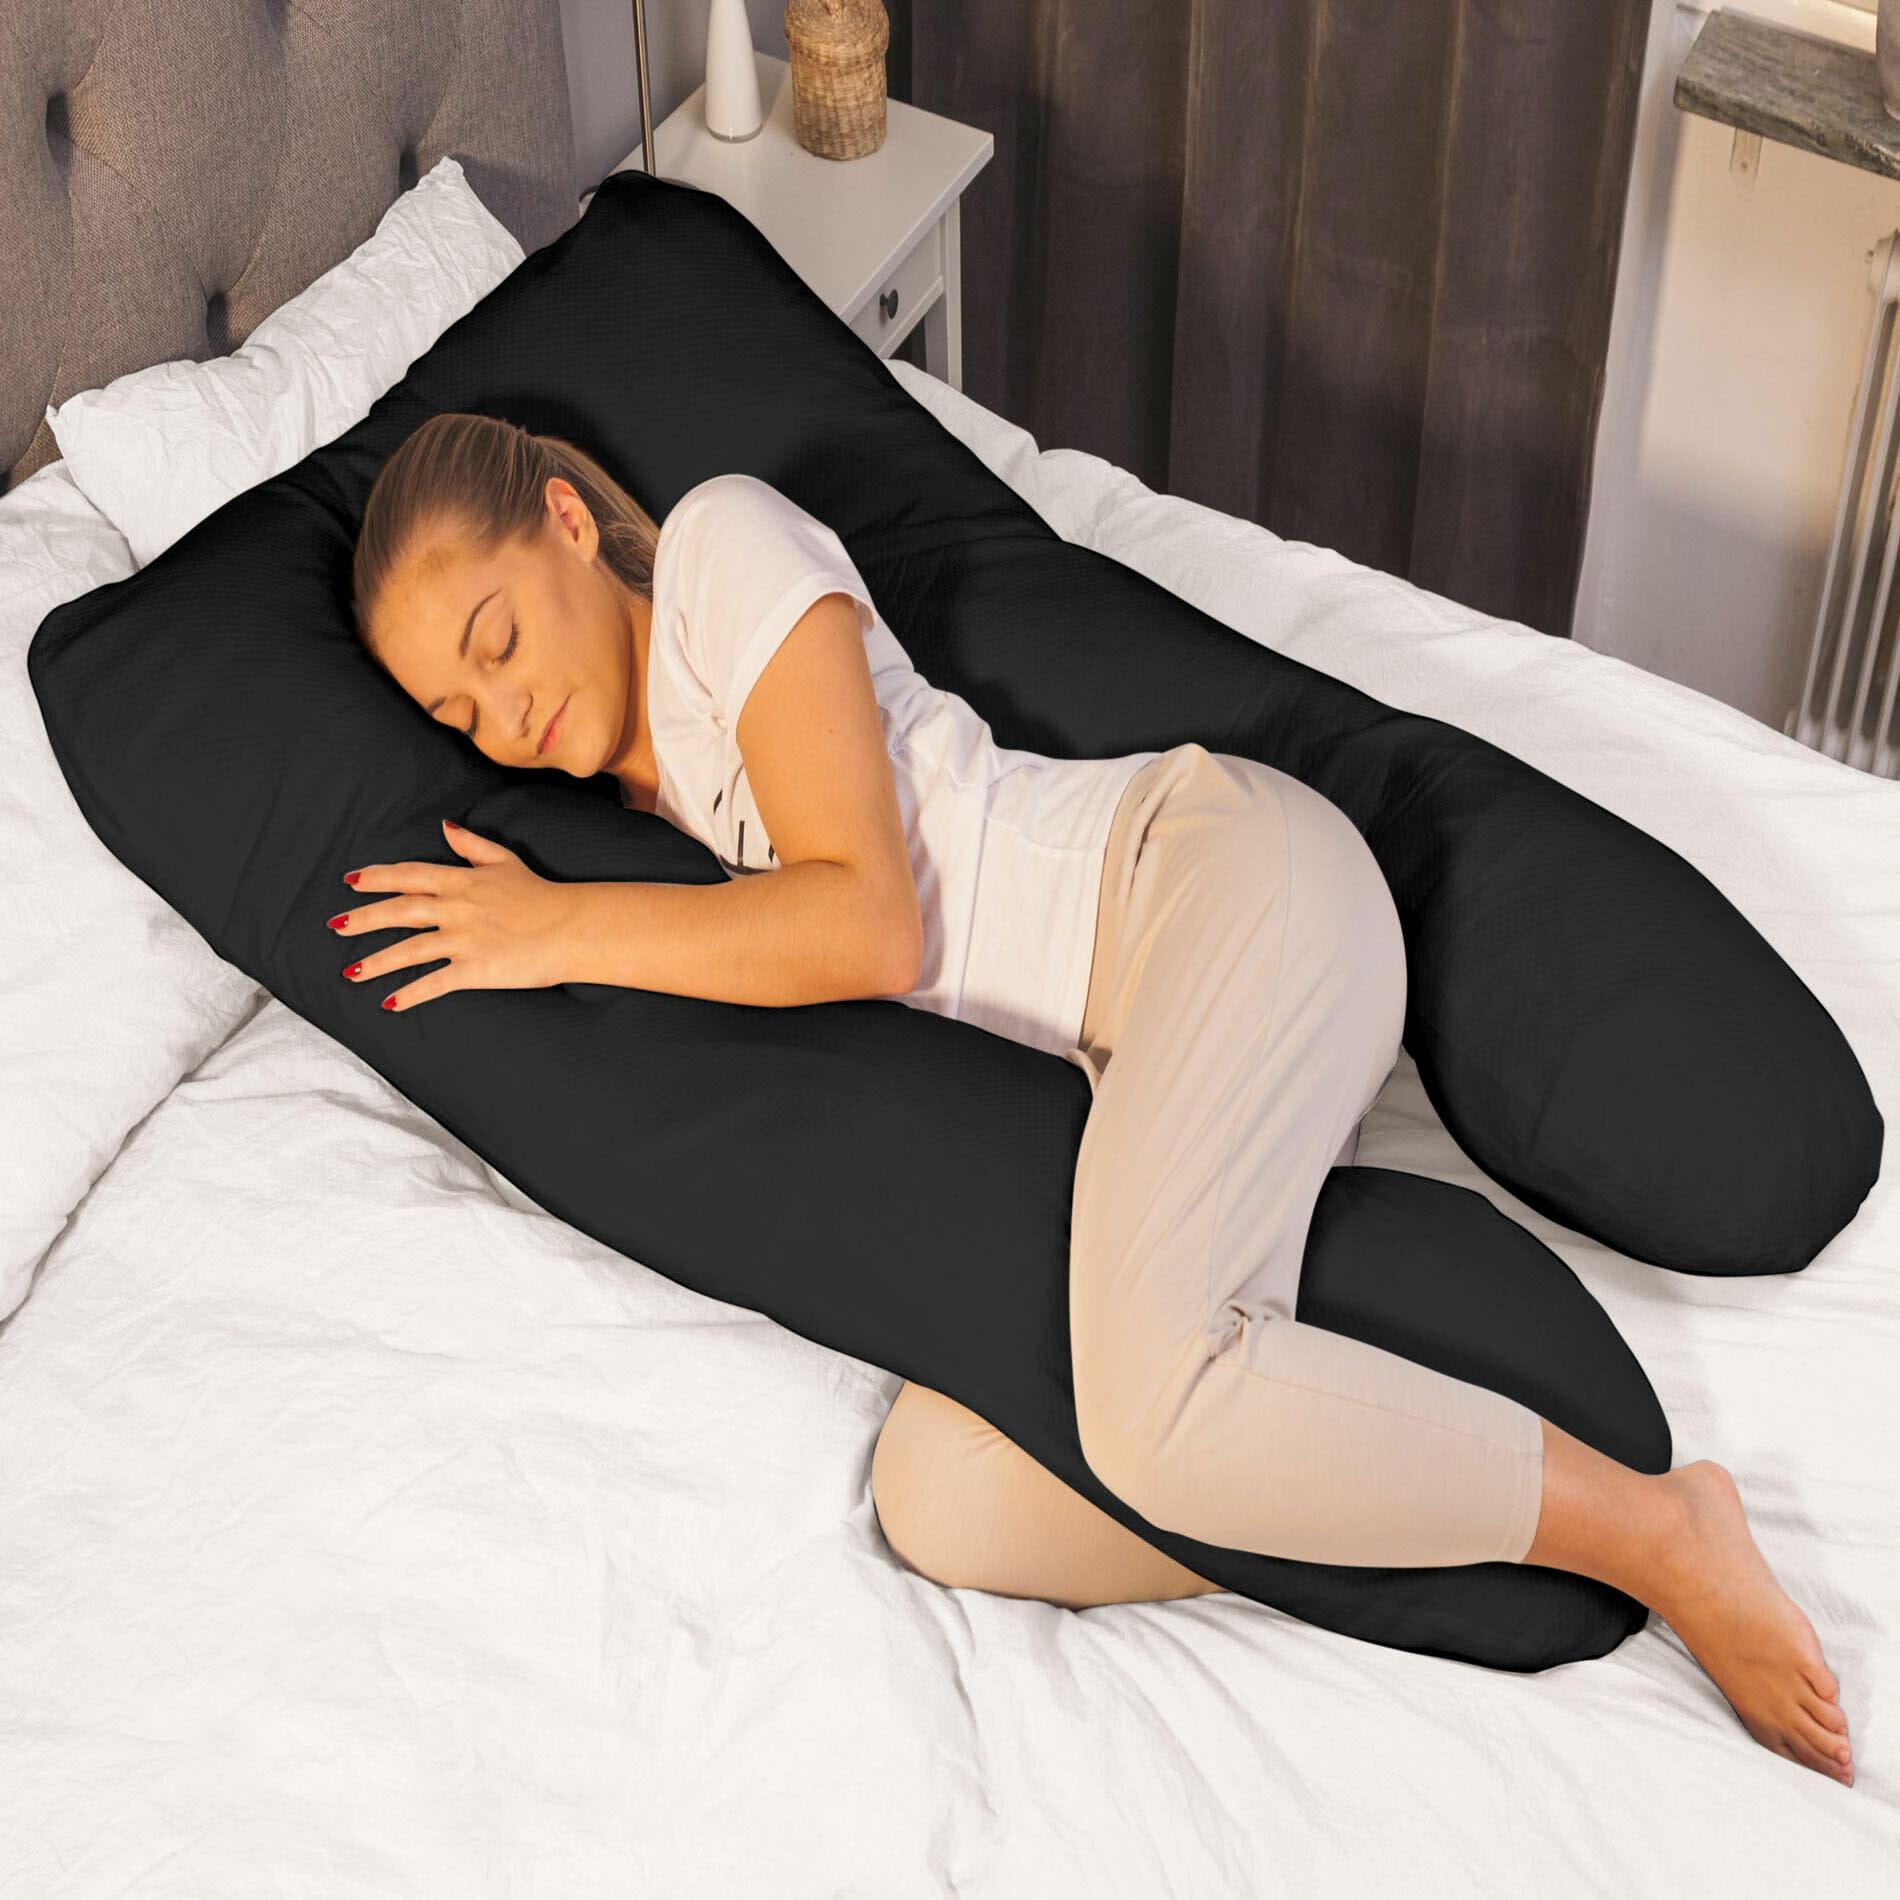 View Pregnancy Body Pillow Maternity Pillows for Sleeping 9FT Black information